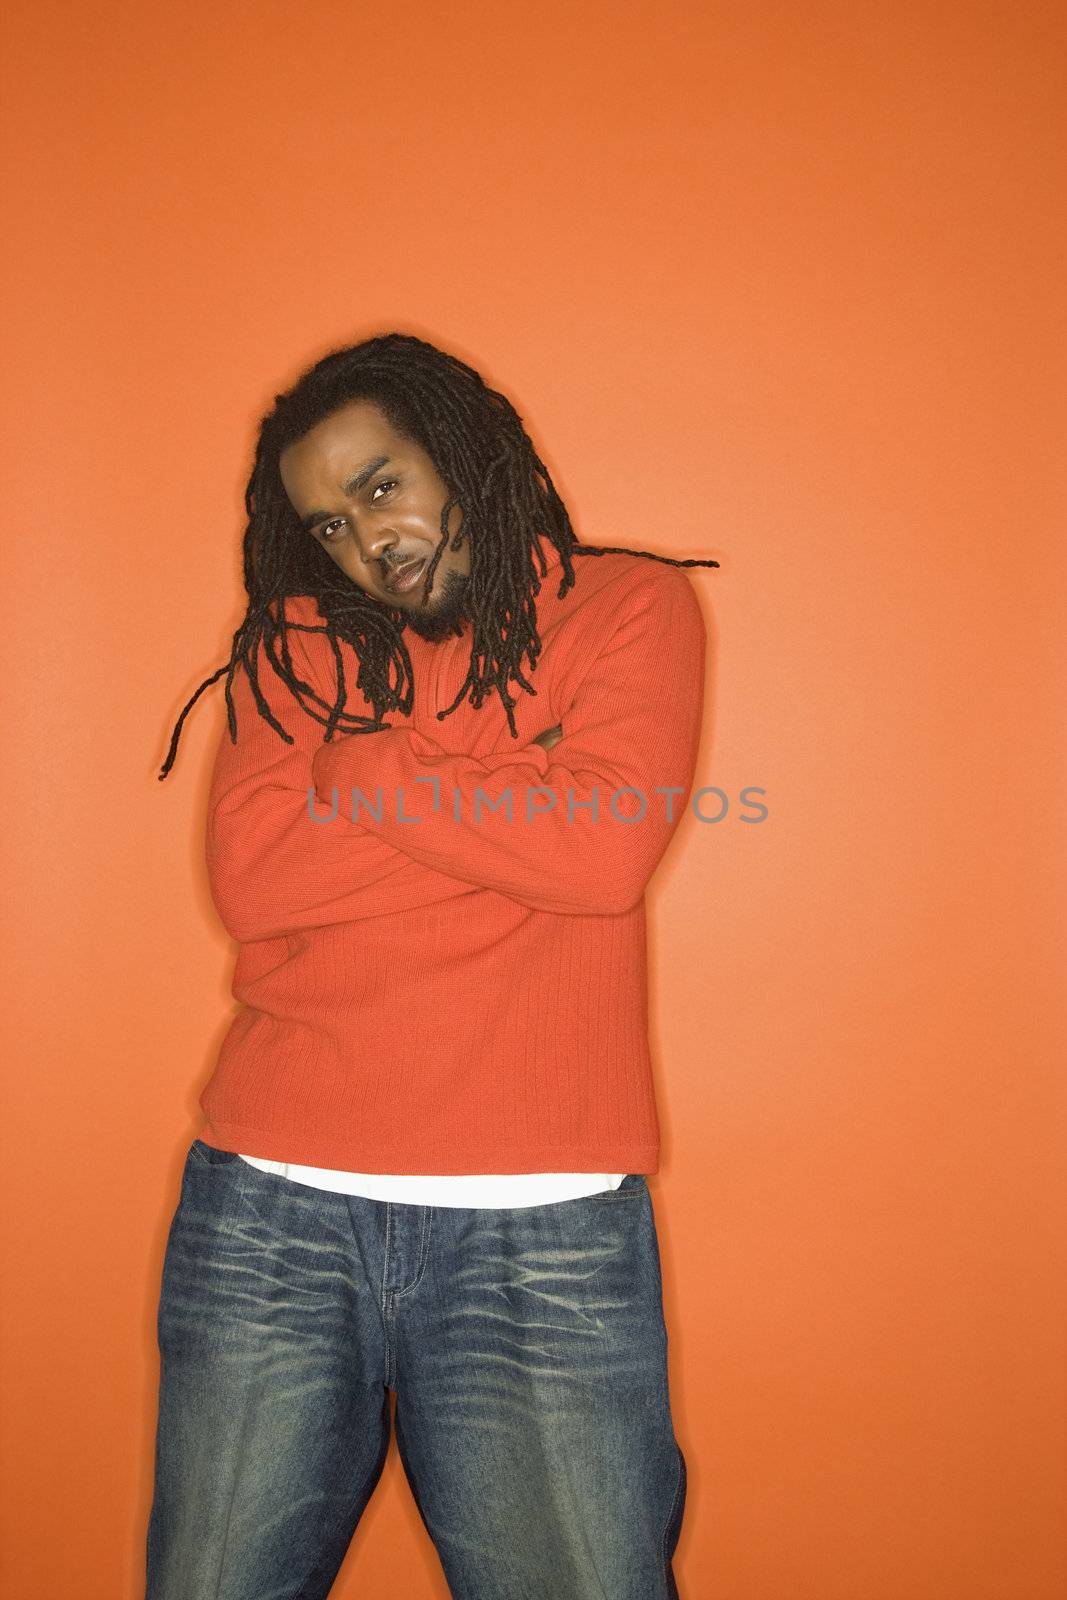 African-American mid-adult man with crossed arms and attitude wearing orange clothing on orange background.